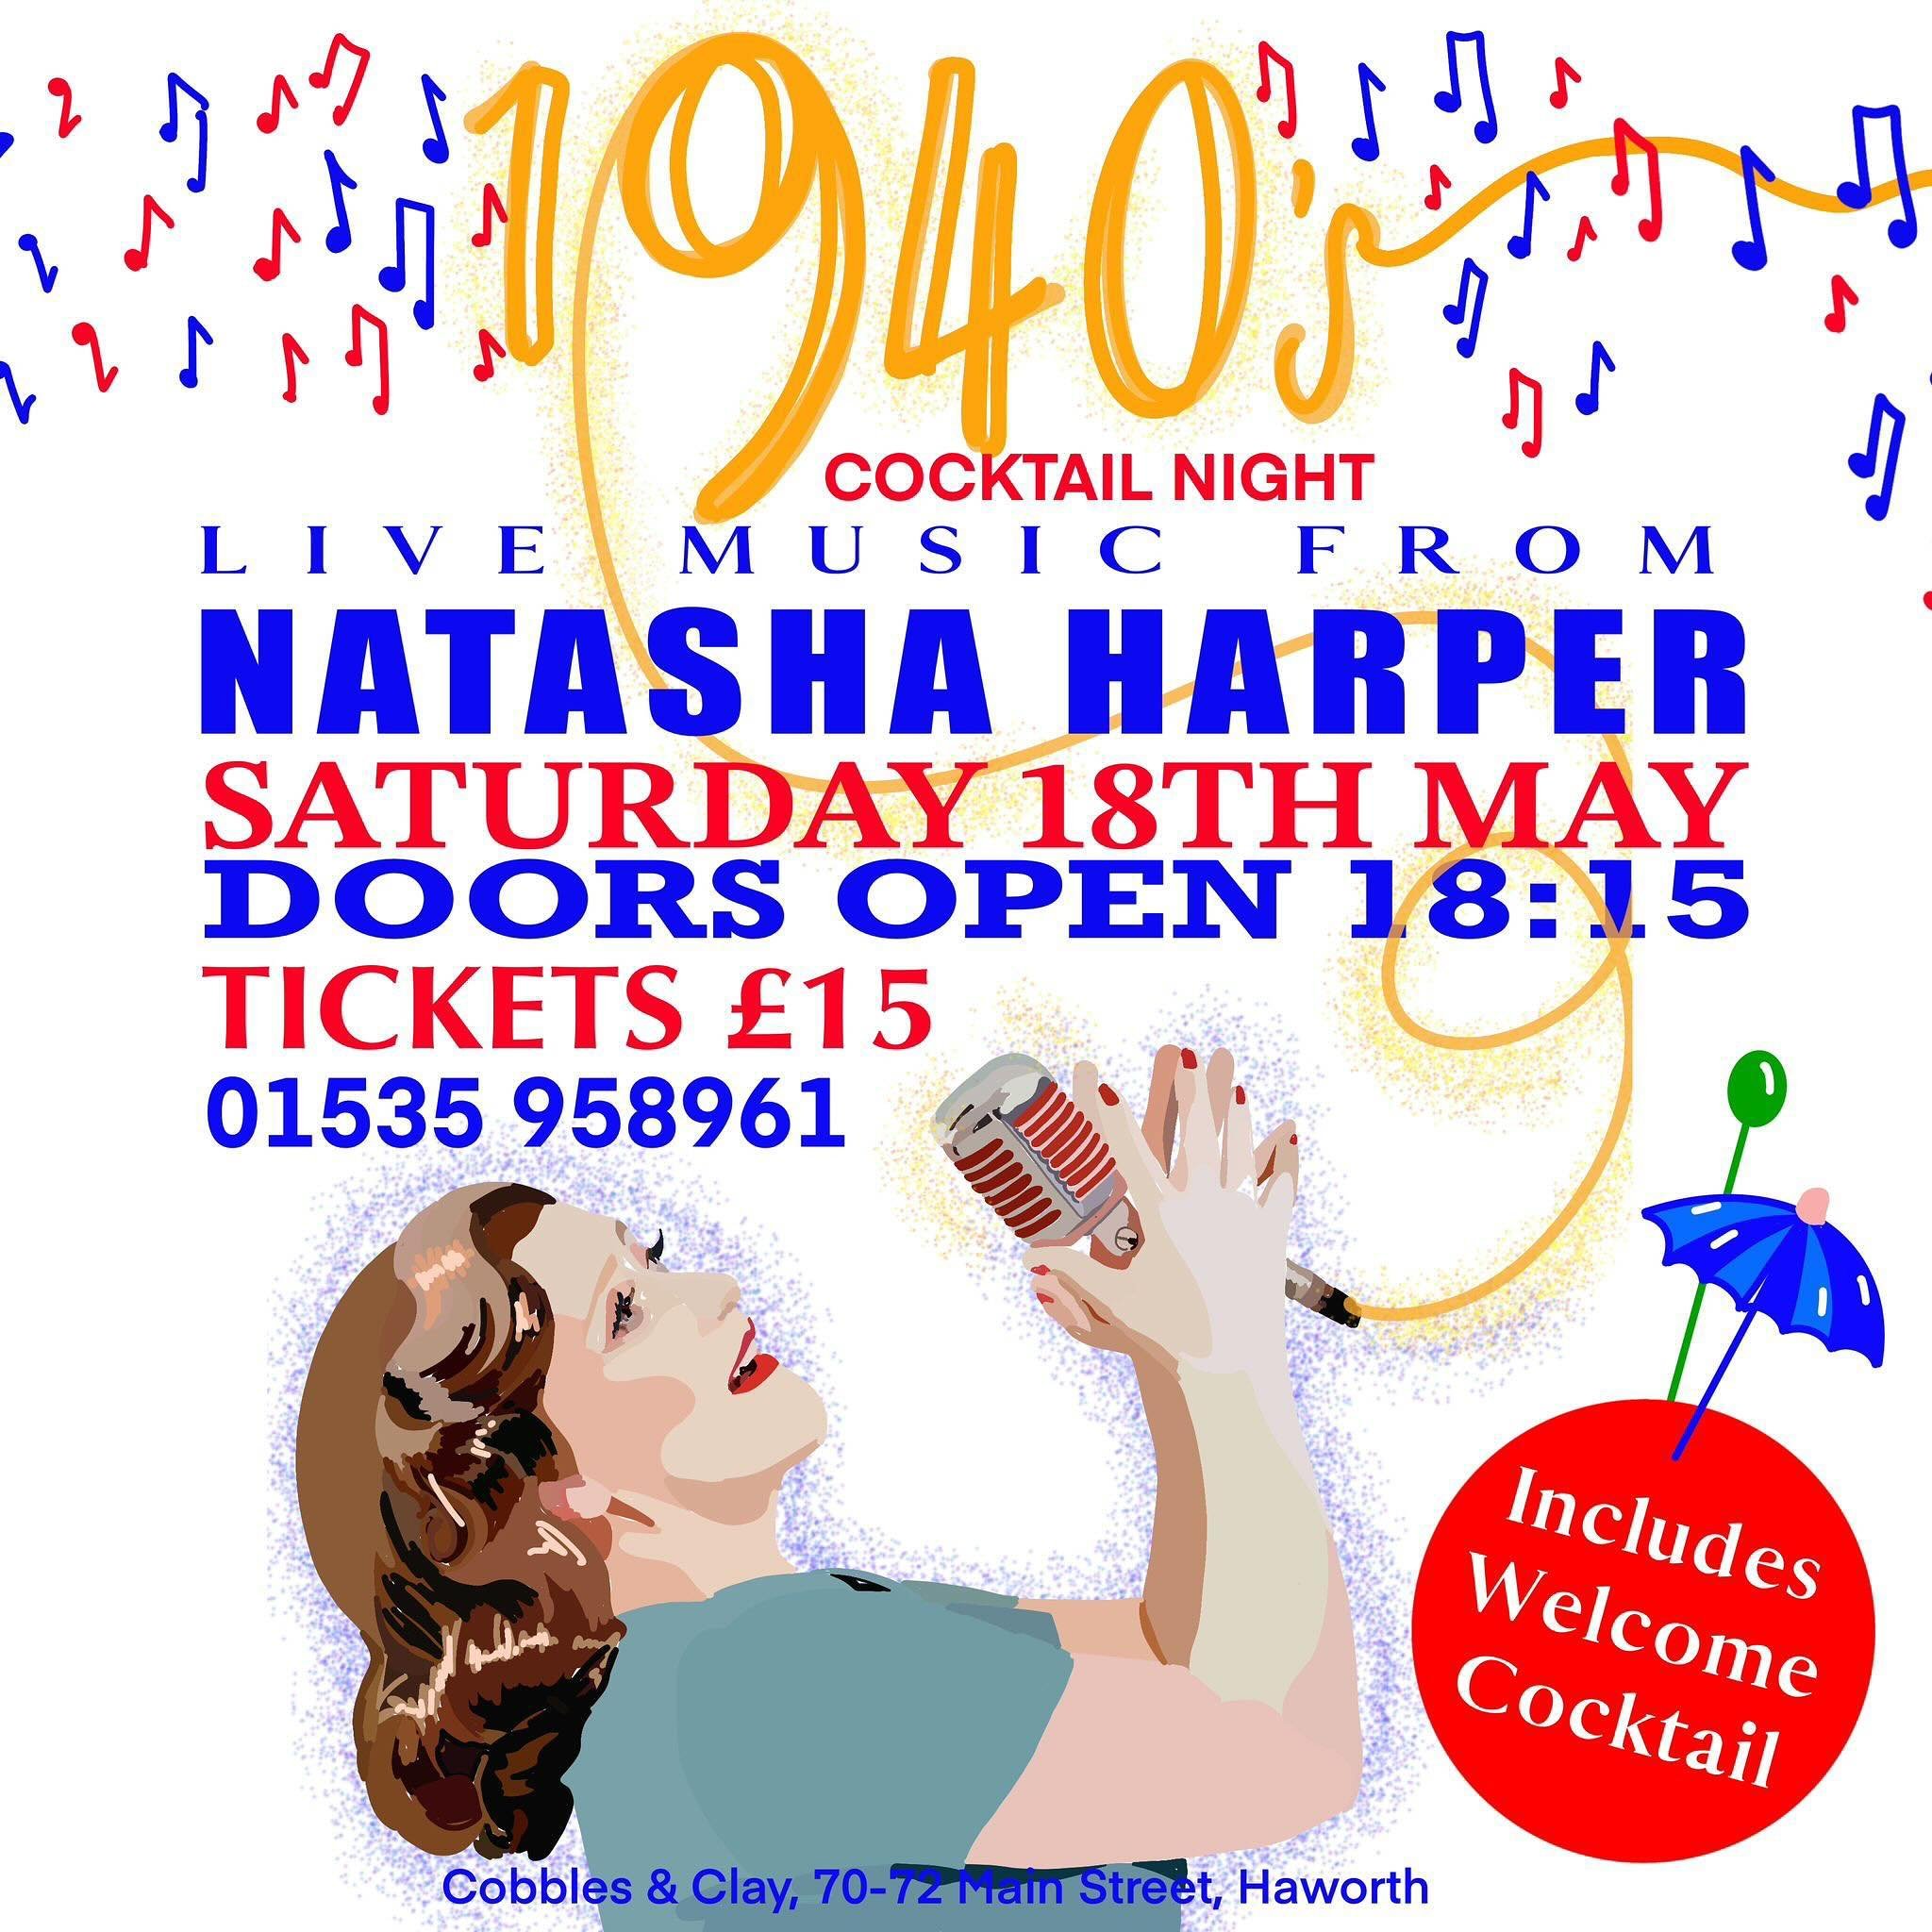 Join us for our 1940s cocktail evening on Saturday 18th May! 🇬🇧🍸

We&rsquo;ve got live music from @natashaharper101 🎤

Tickets are &pound;15 which includes your welcome cocktail upon arrival. Call us on 01535 958961 to book your tickets. 

#1940s